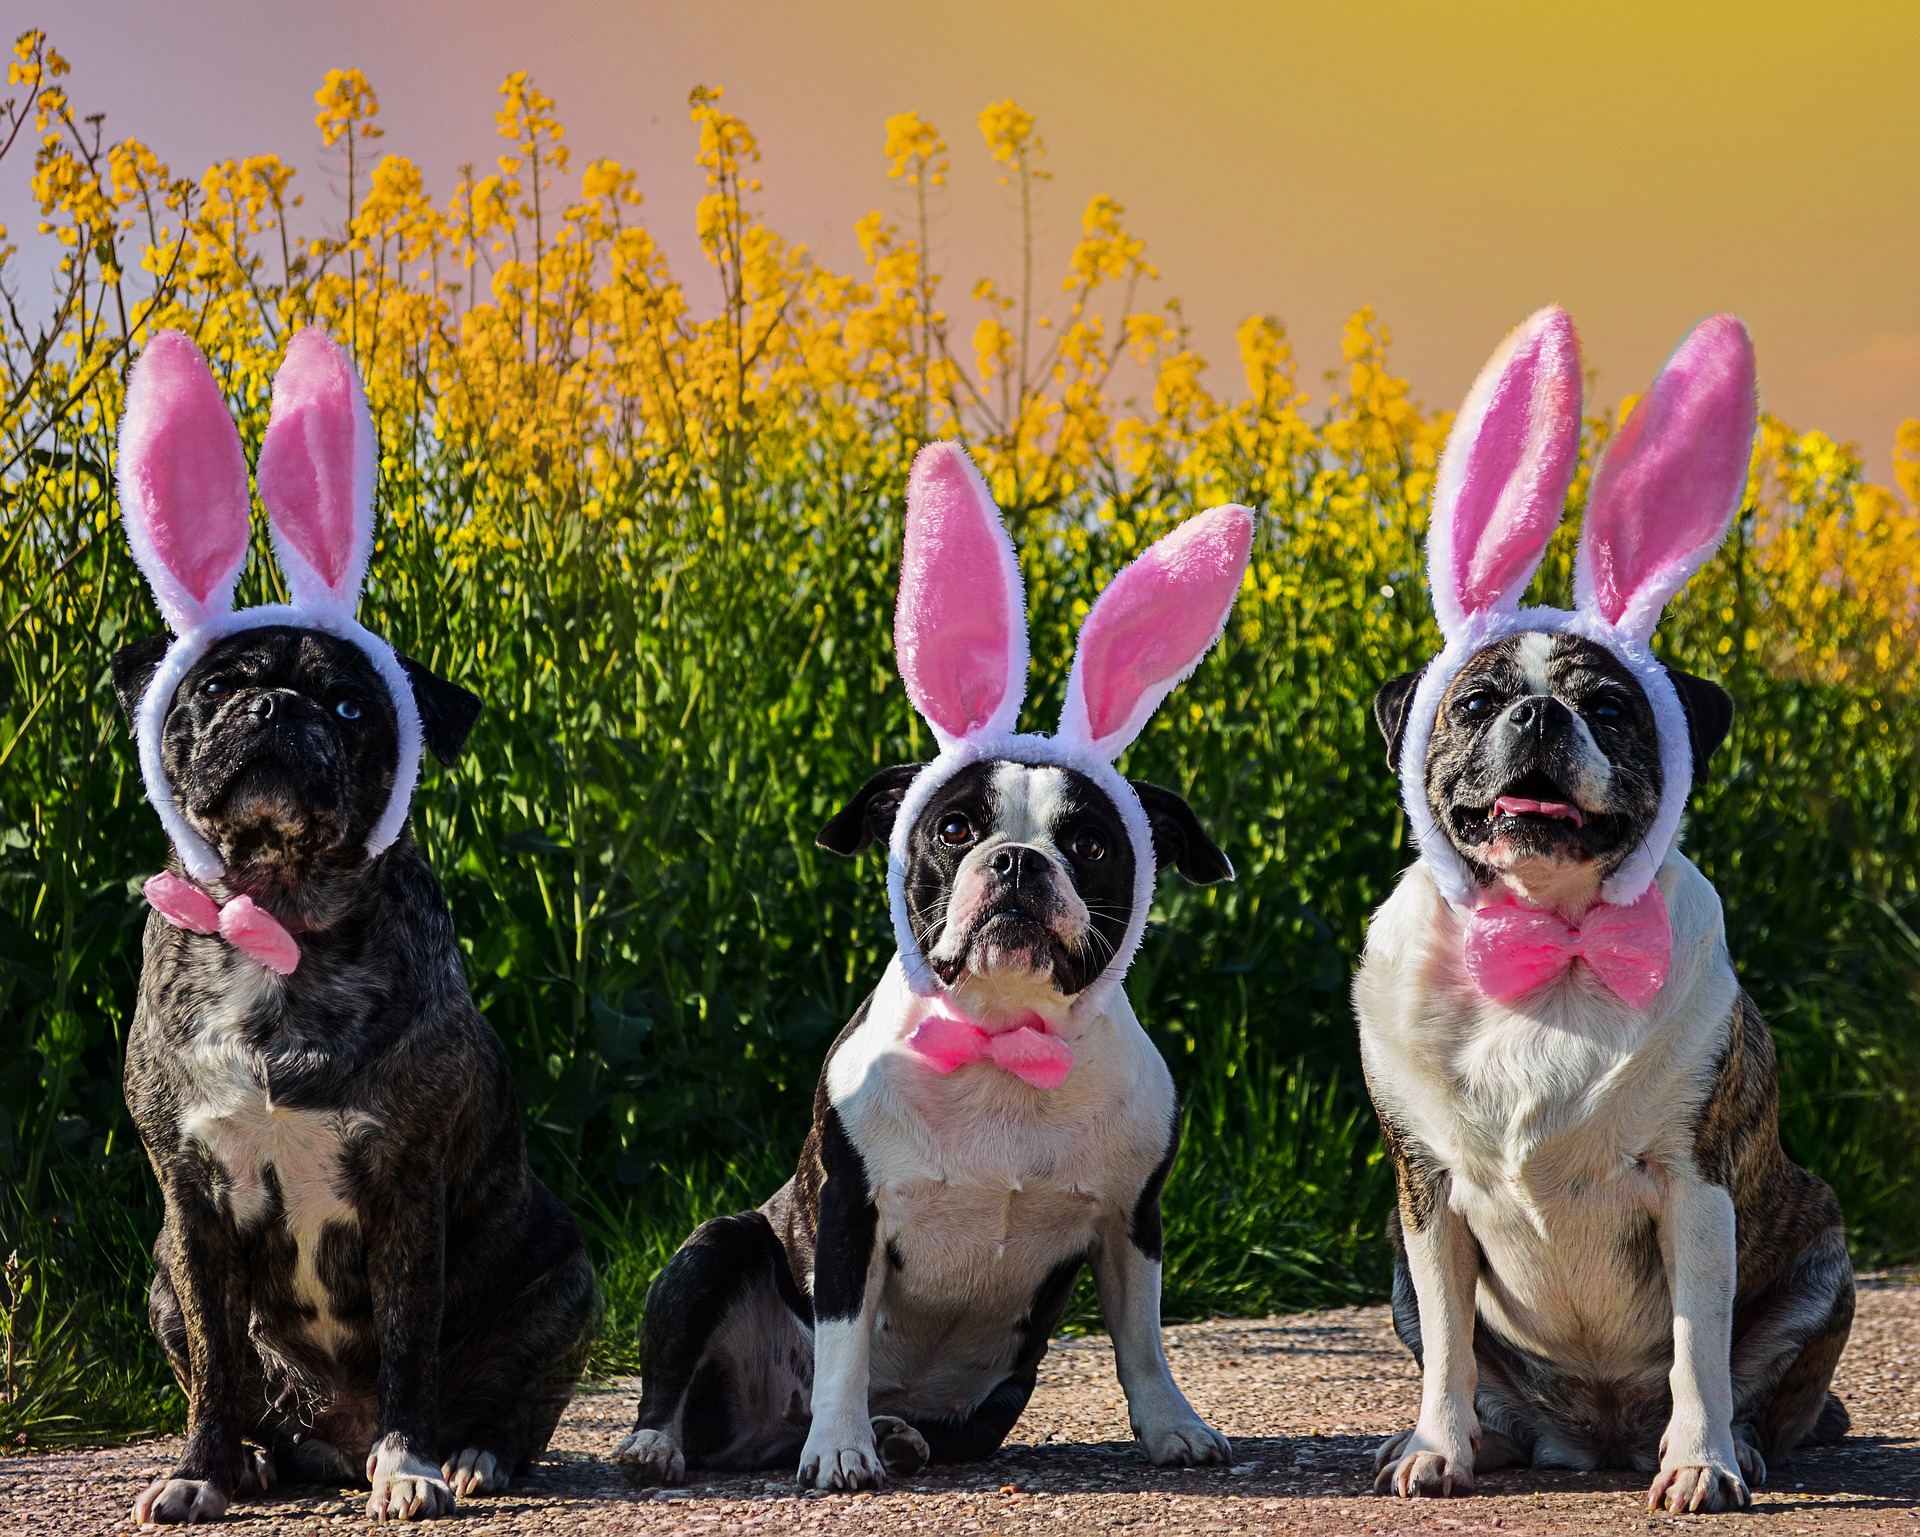 Here's how your pet can snap a free photo with the Easter Bunny